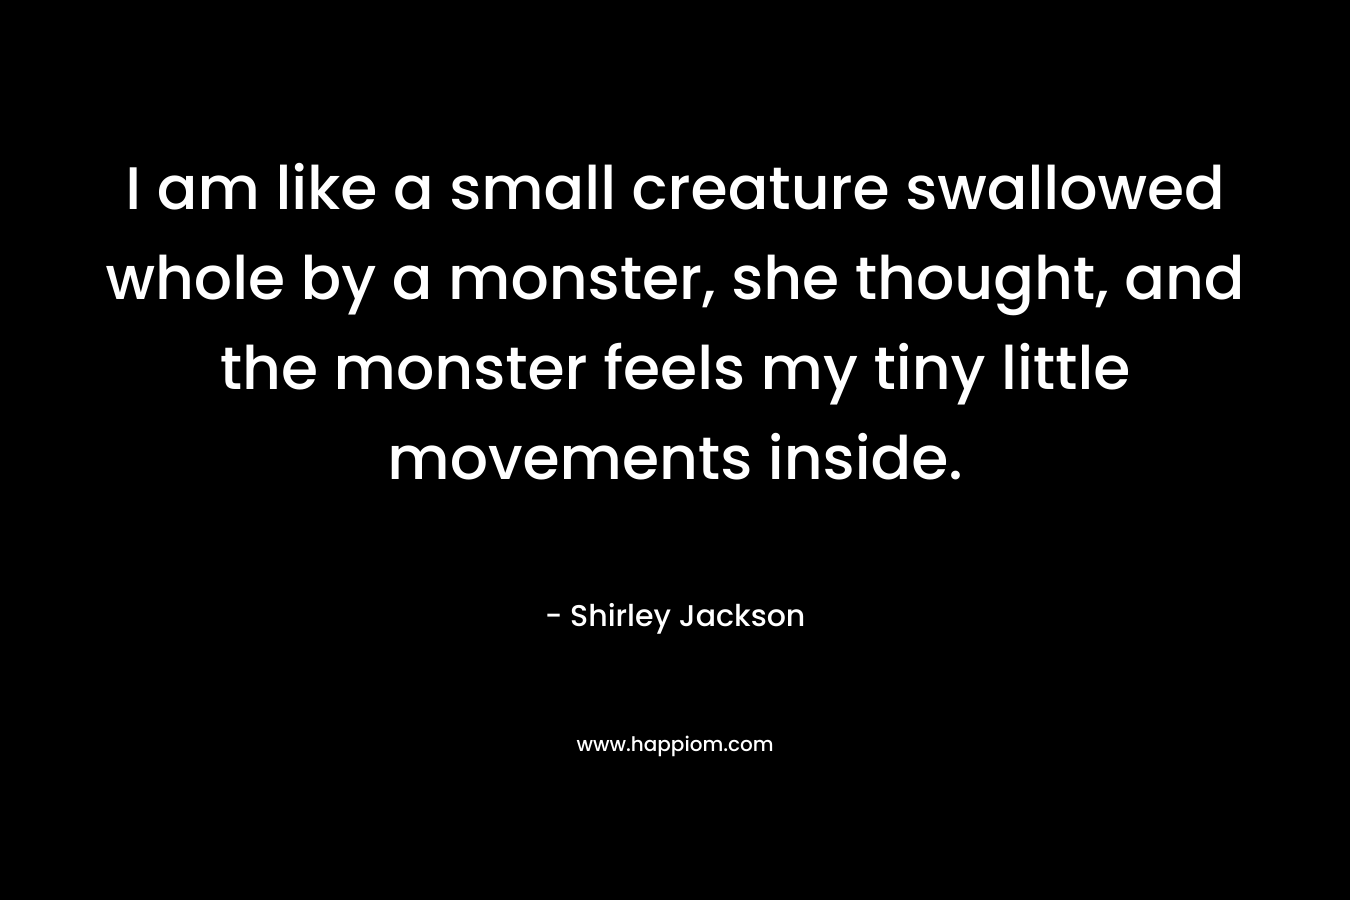 I am like a small creature swallowed whole by a monster, she thought, and the monster feels my tiny little movements inside. – Shirley Jackson